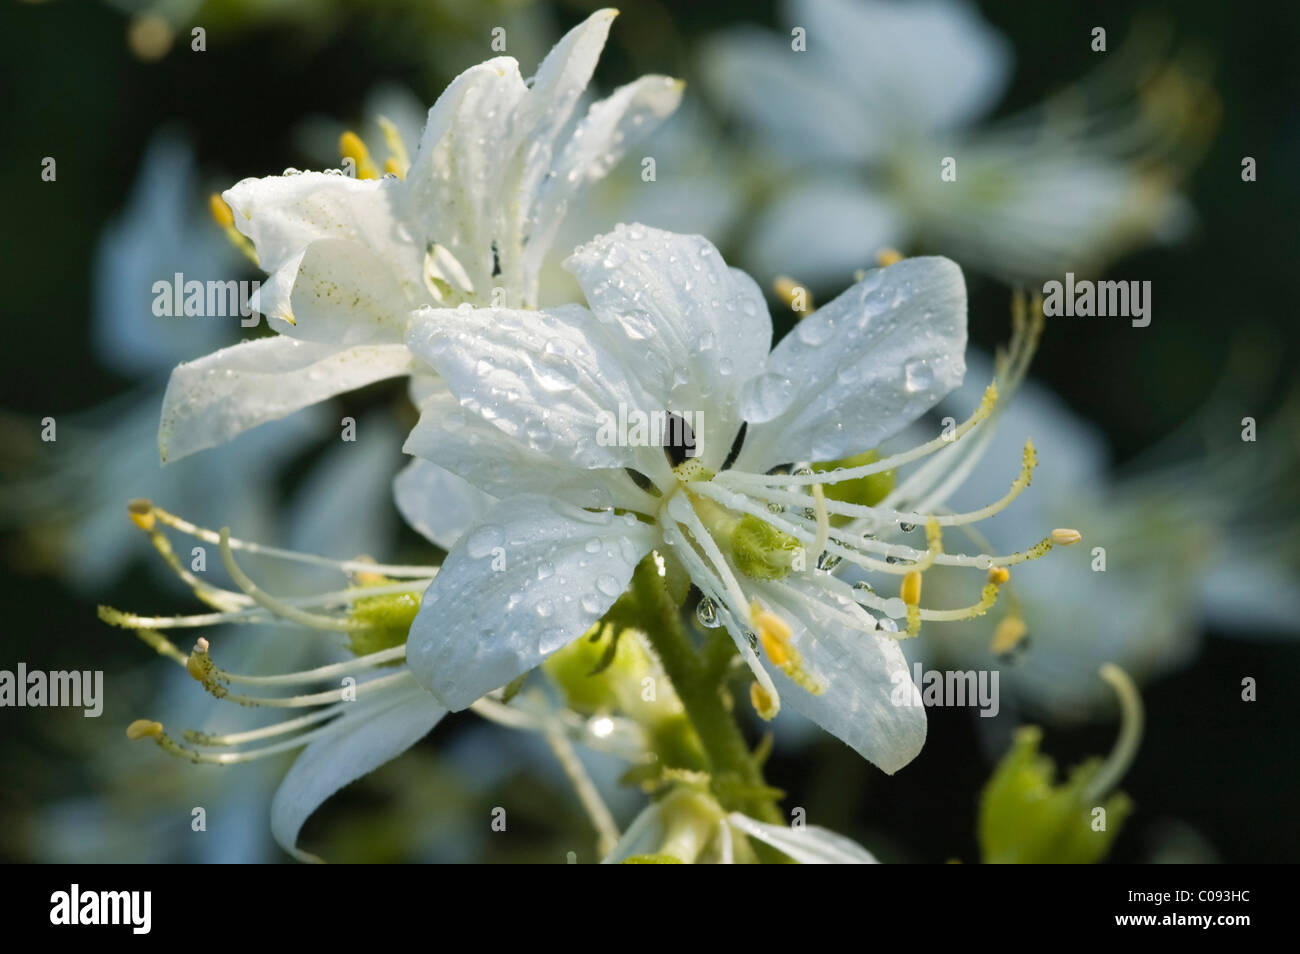 Dittany (Dictamnus albus), flowering, medicinal plant, Germany Stock Photo